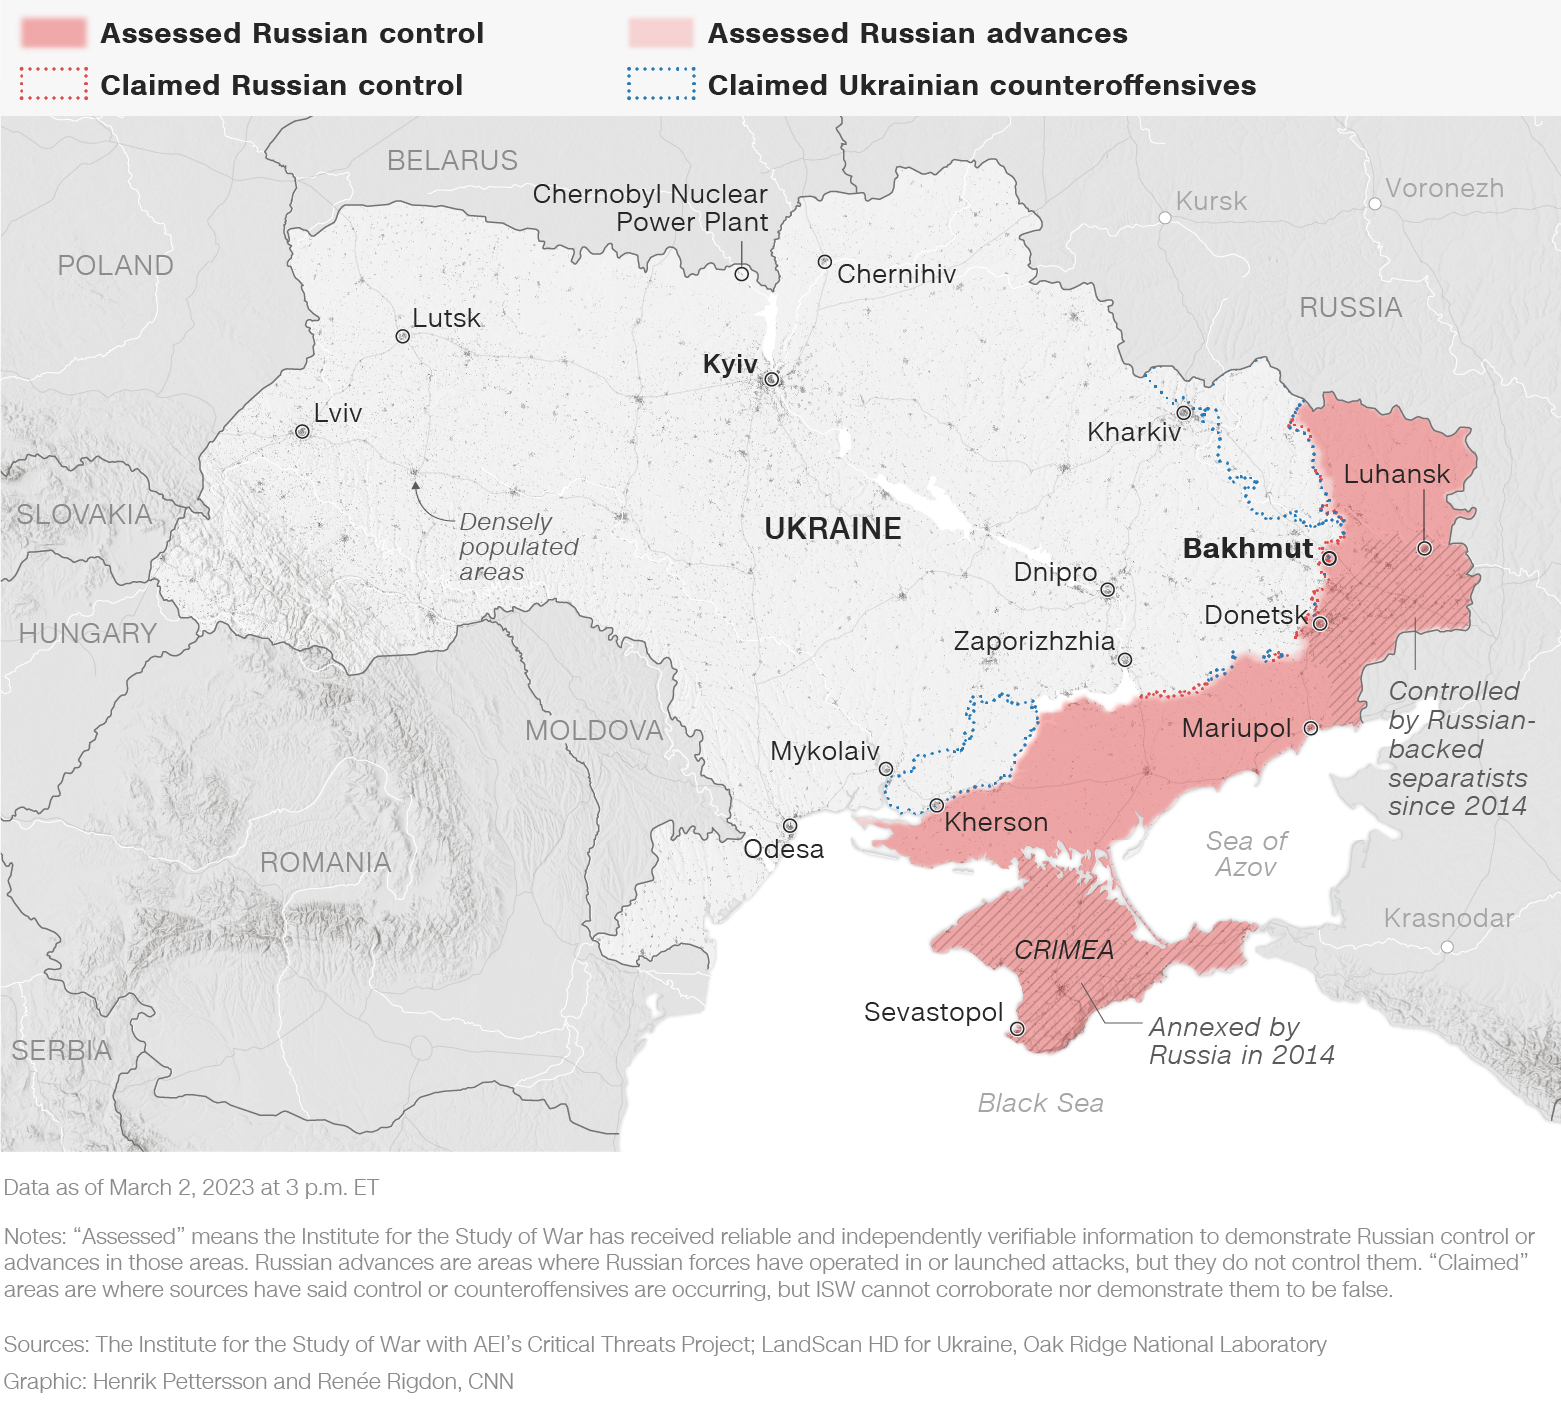 This map shows the latest state of control in Ukraine